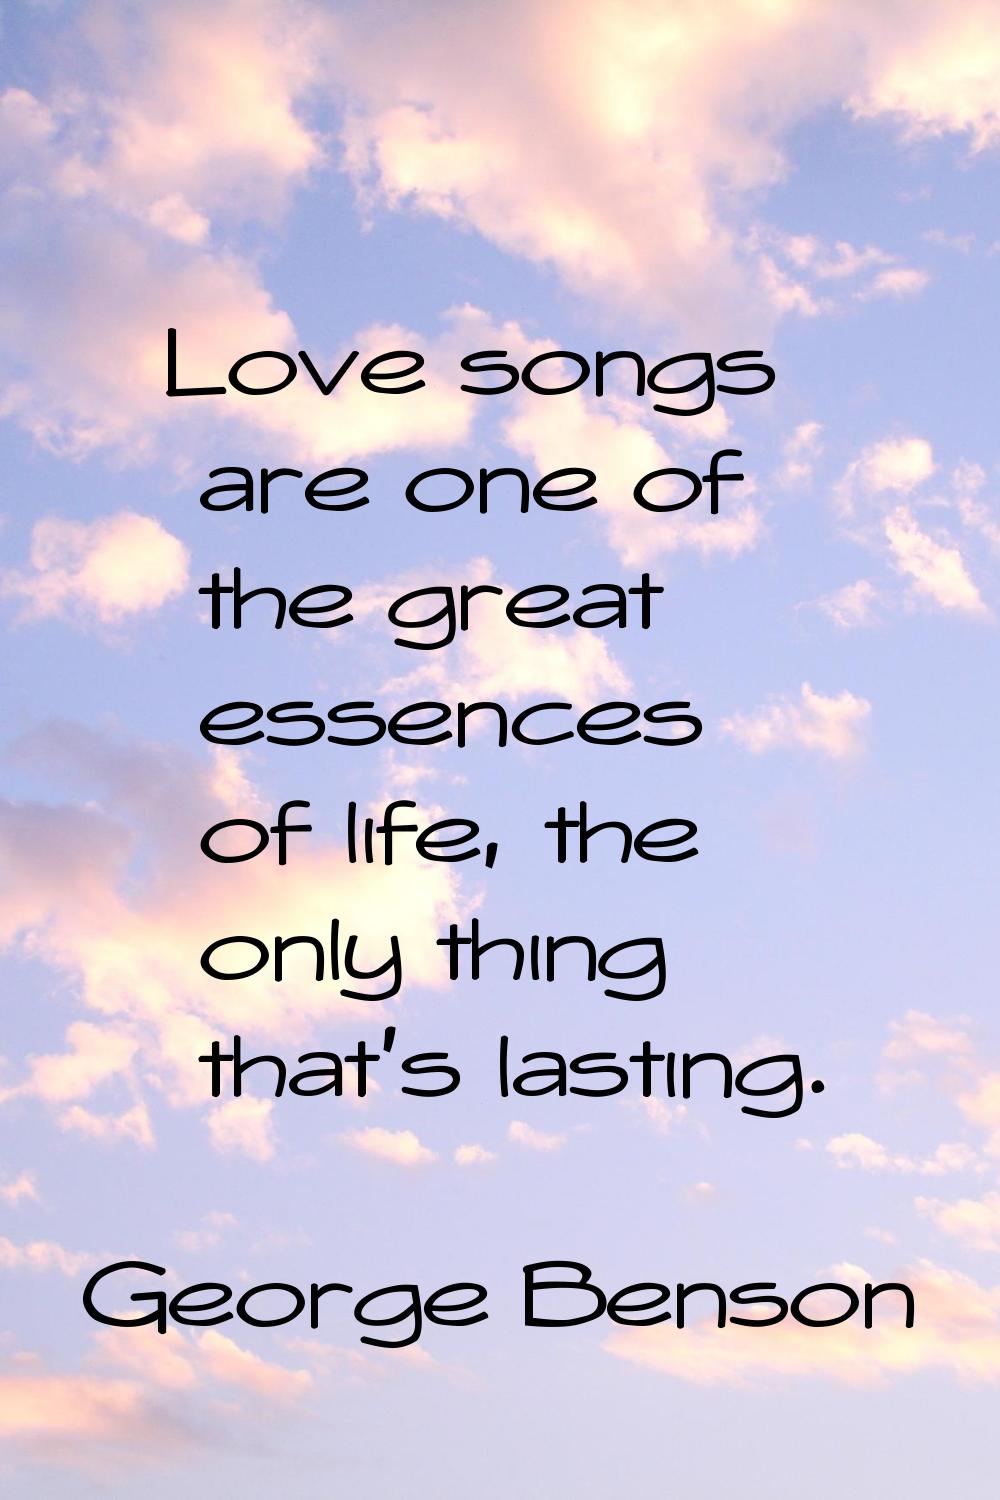 Love songs are one of the great essences of life, the only thing that's lasting.